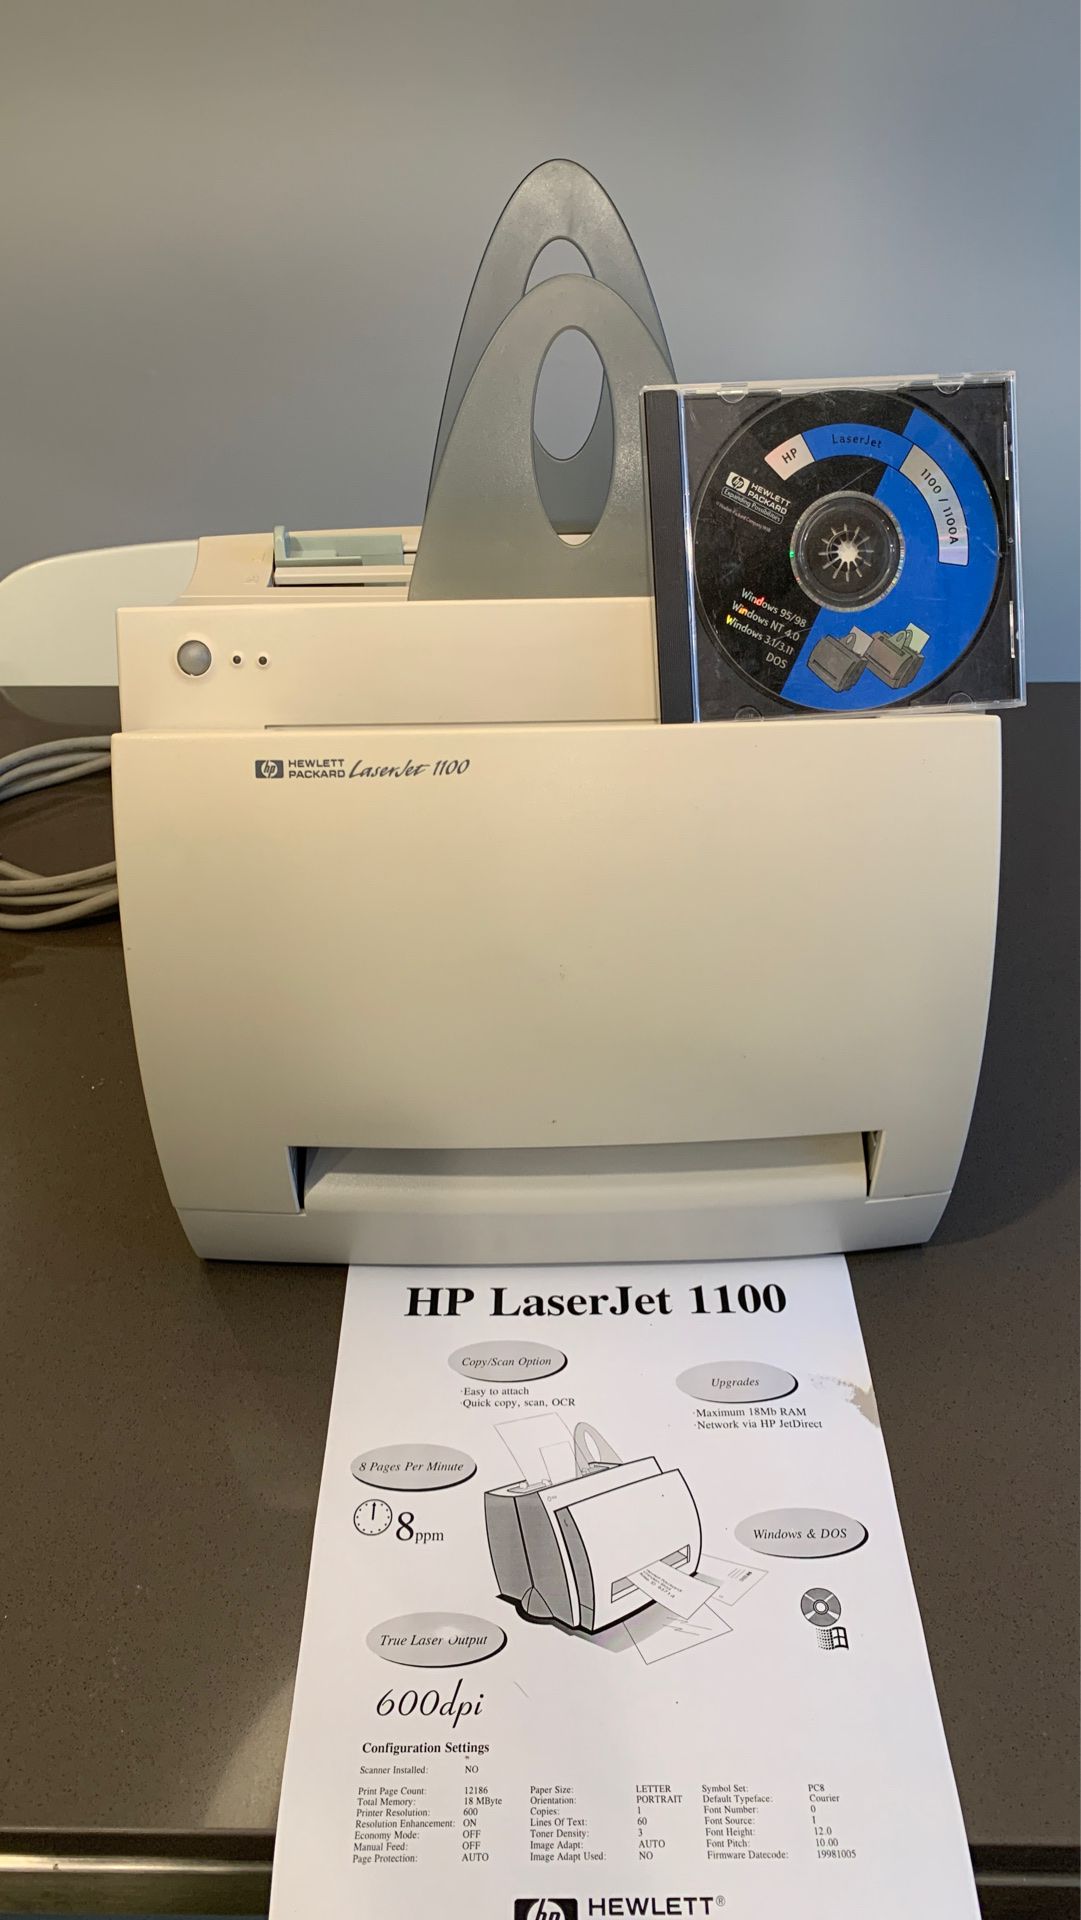 HP Laserjet 1100 B&W printer in good for in Lake Forest, IL - OfferUp